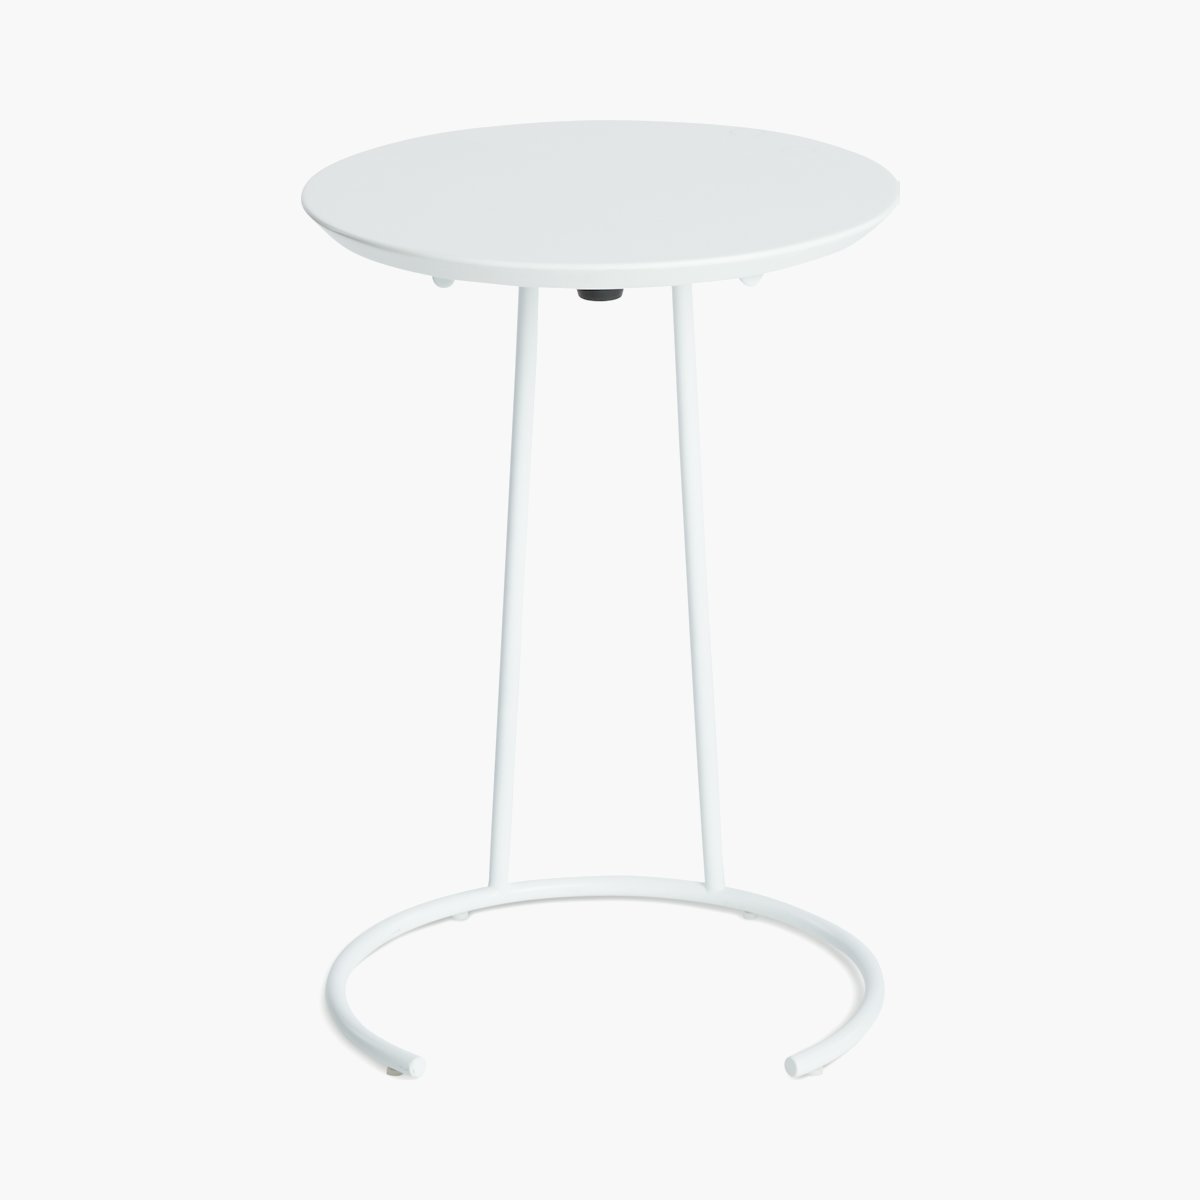 T.710 Small Side Table